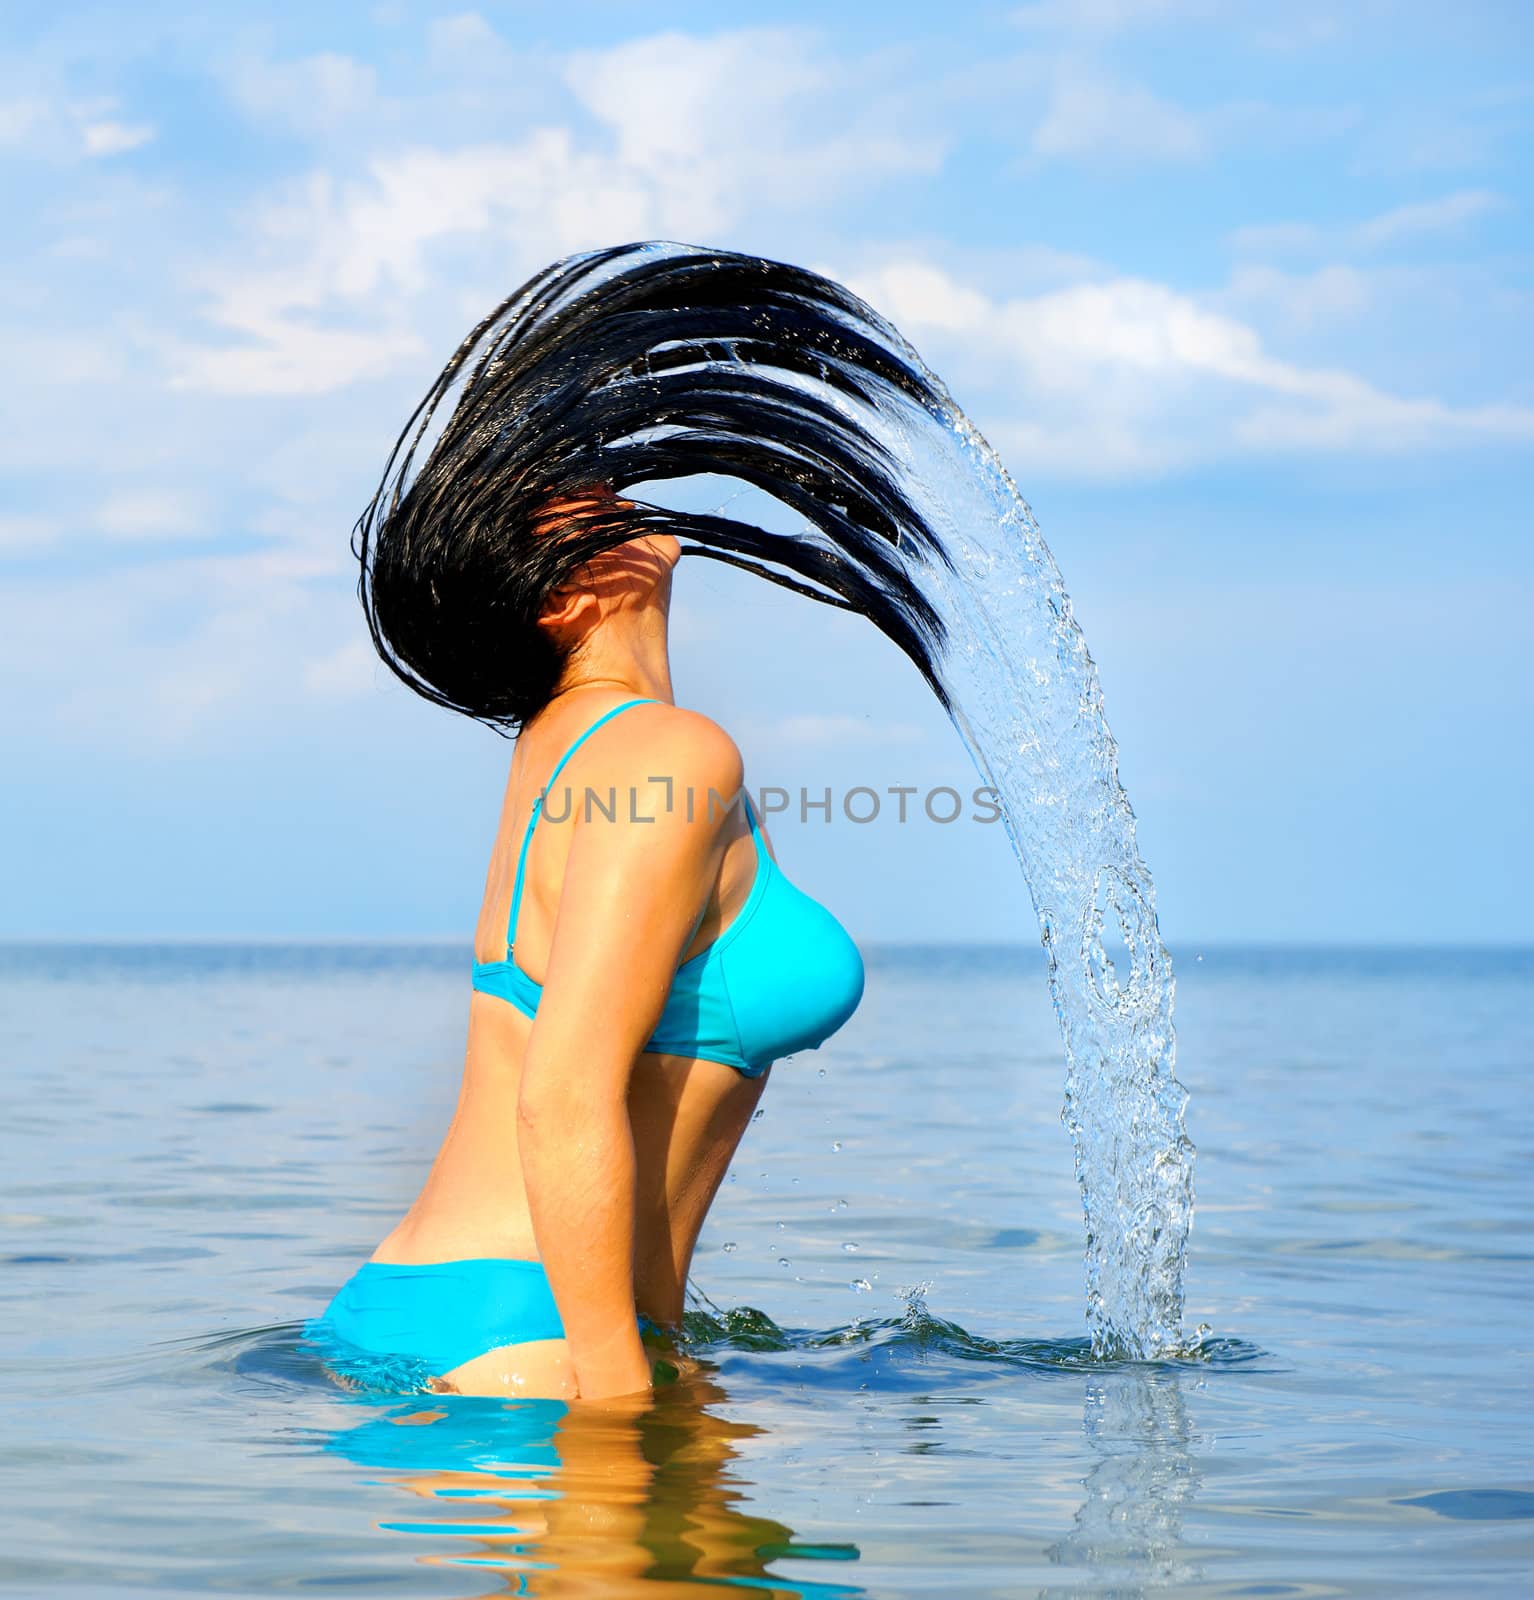 The woman with splashes from hair. Effect of movement